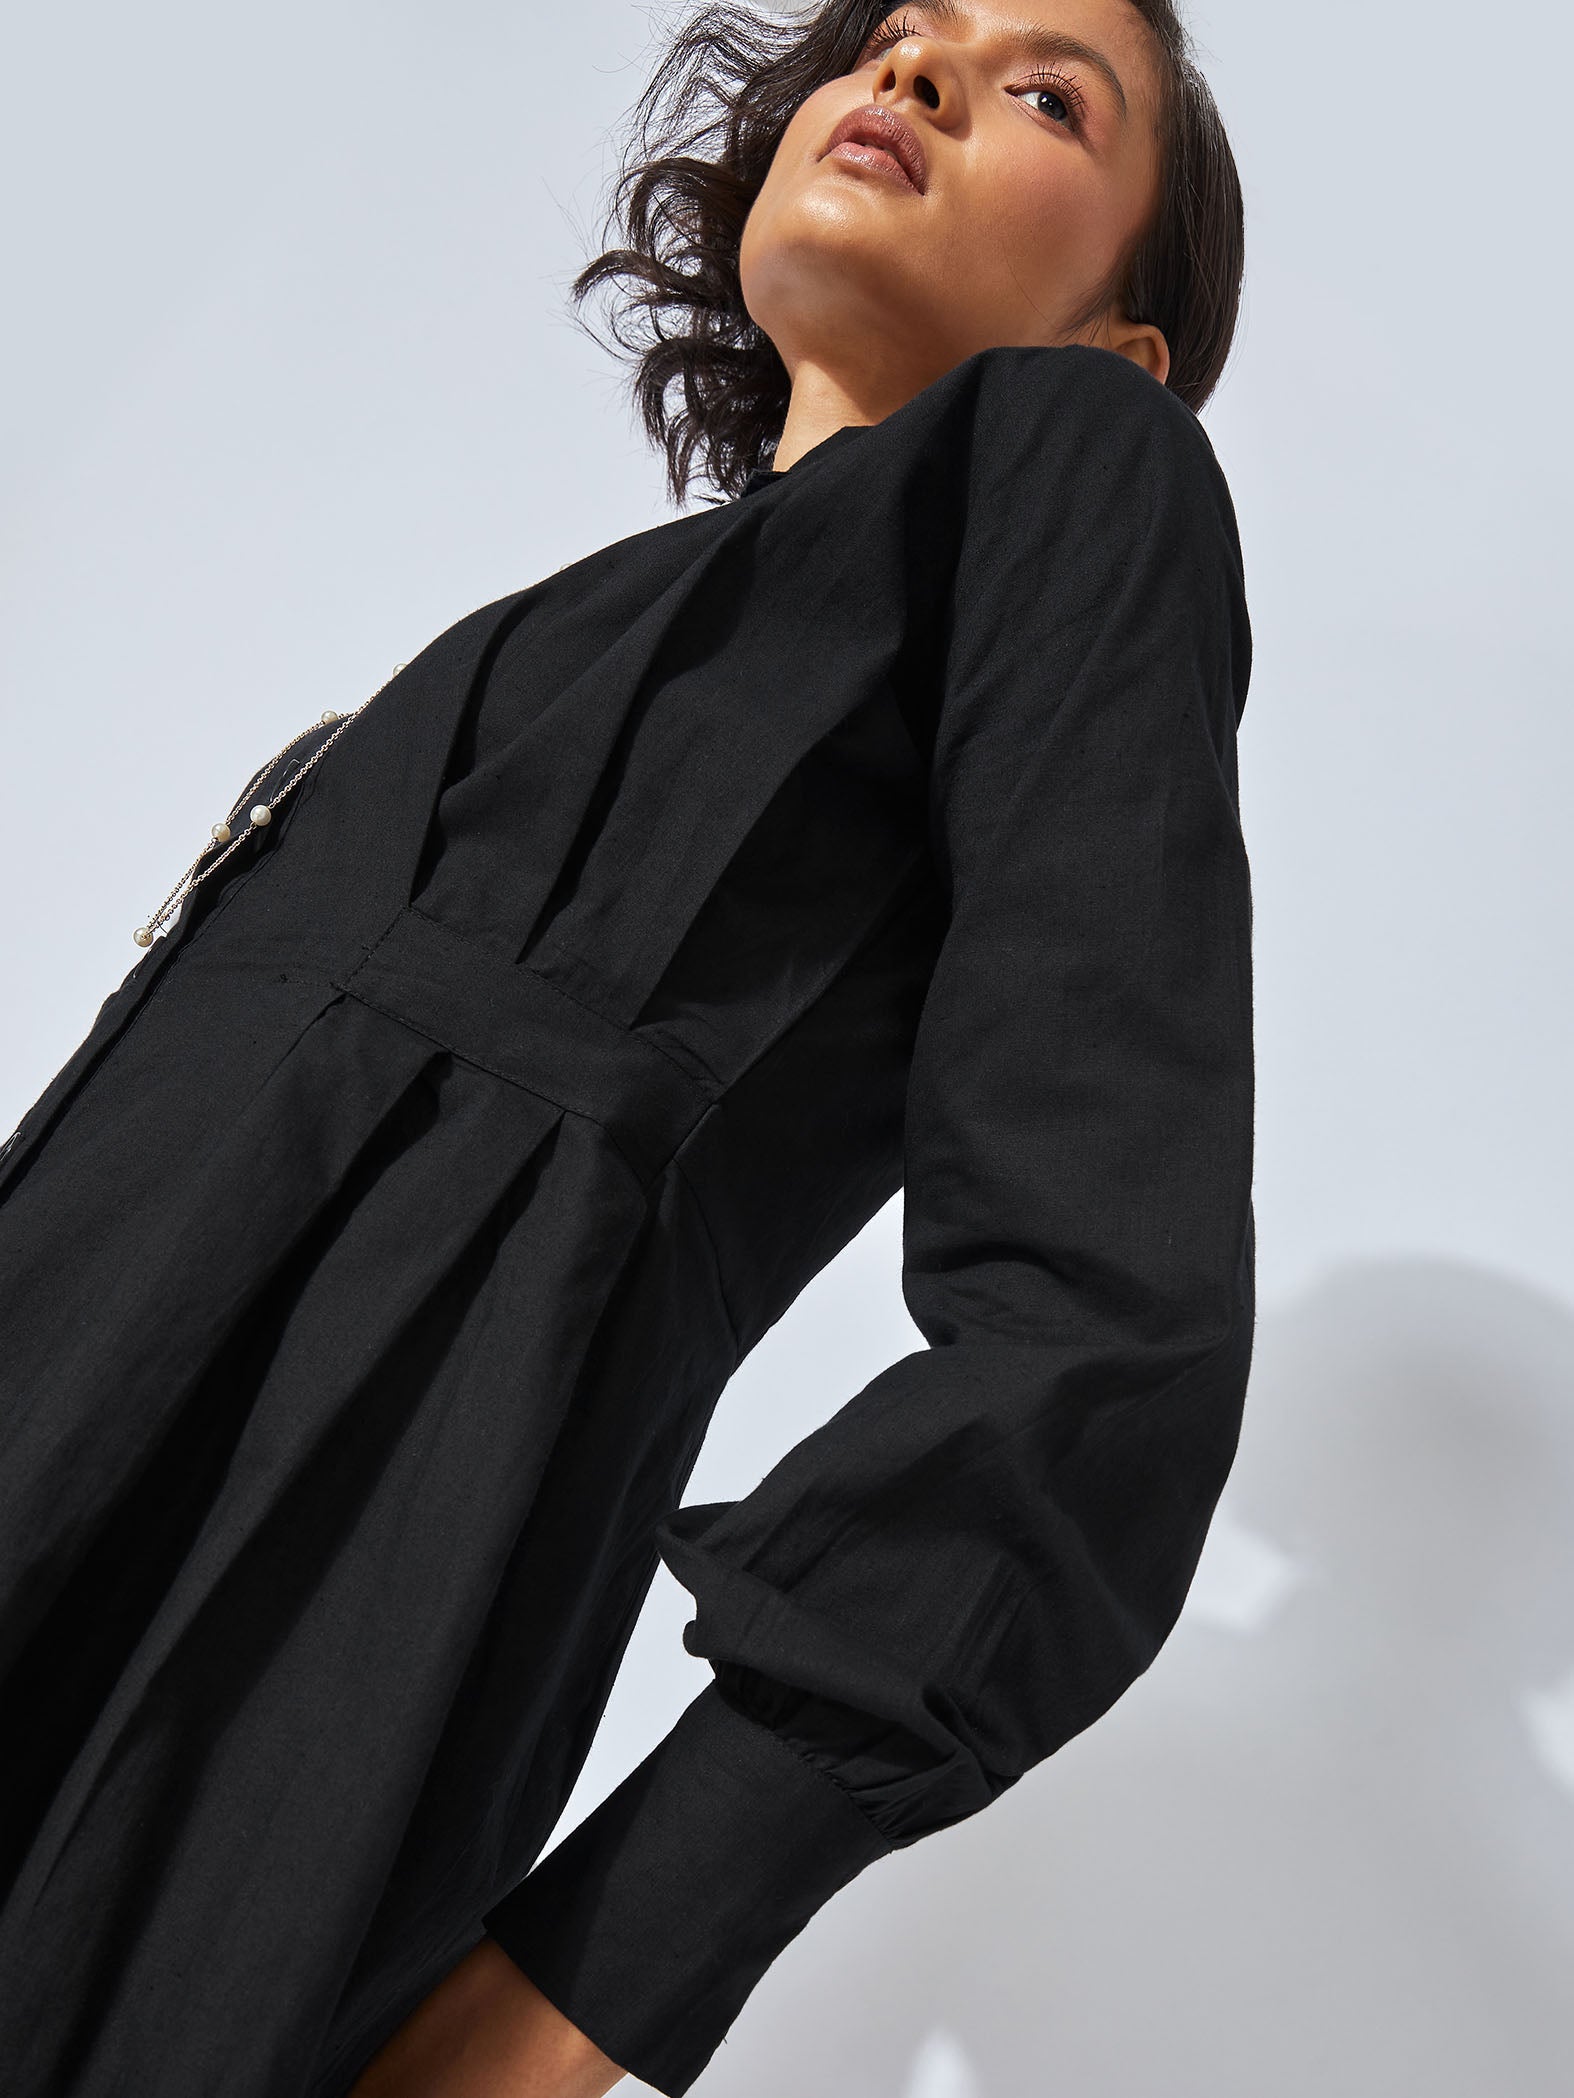 Black Pleated Button Down Dress